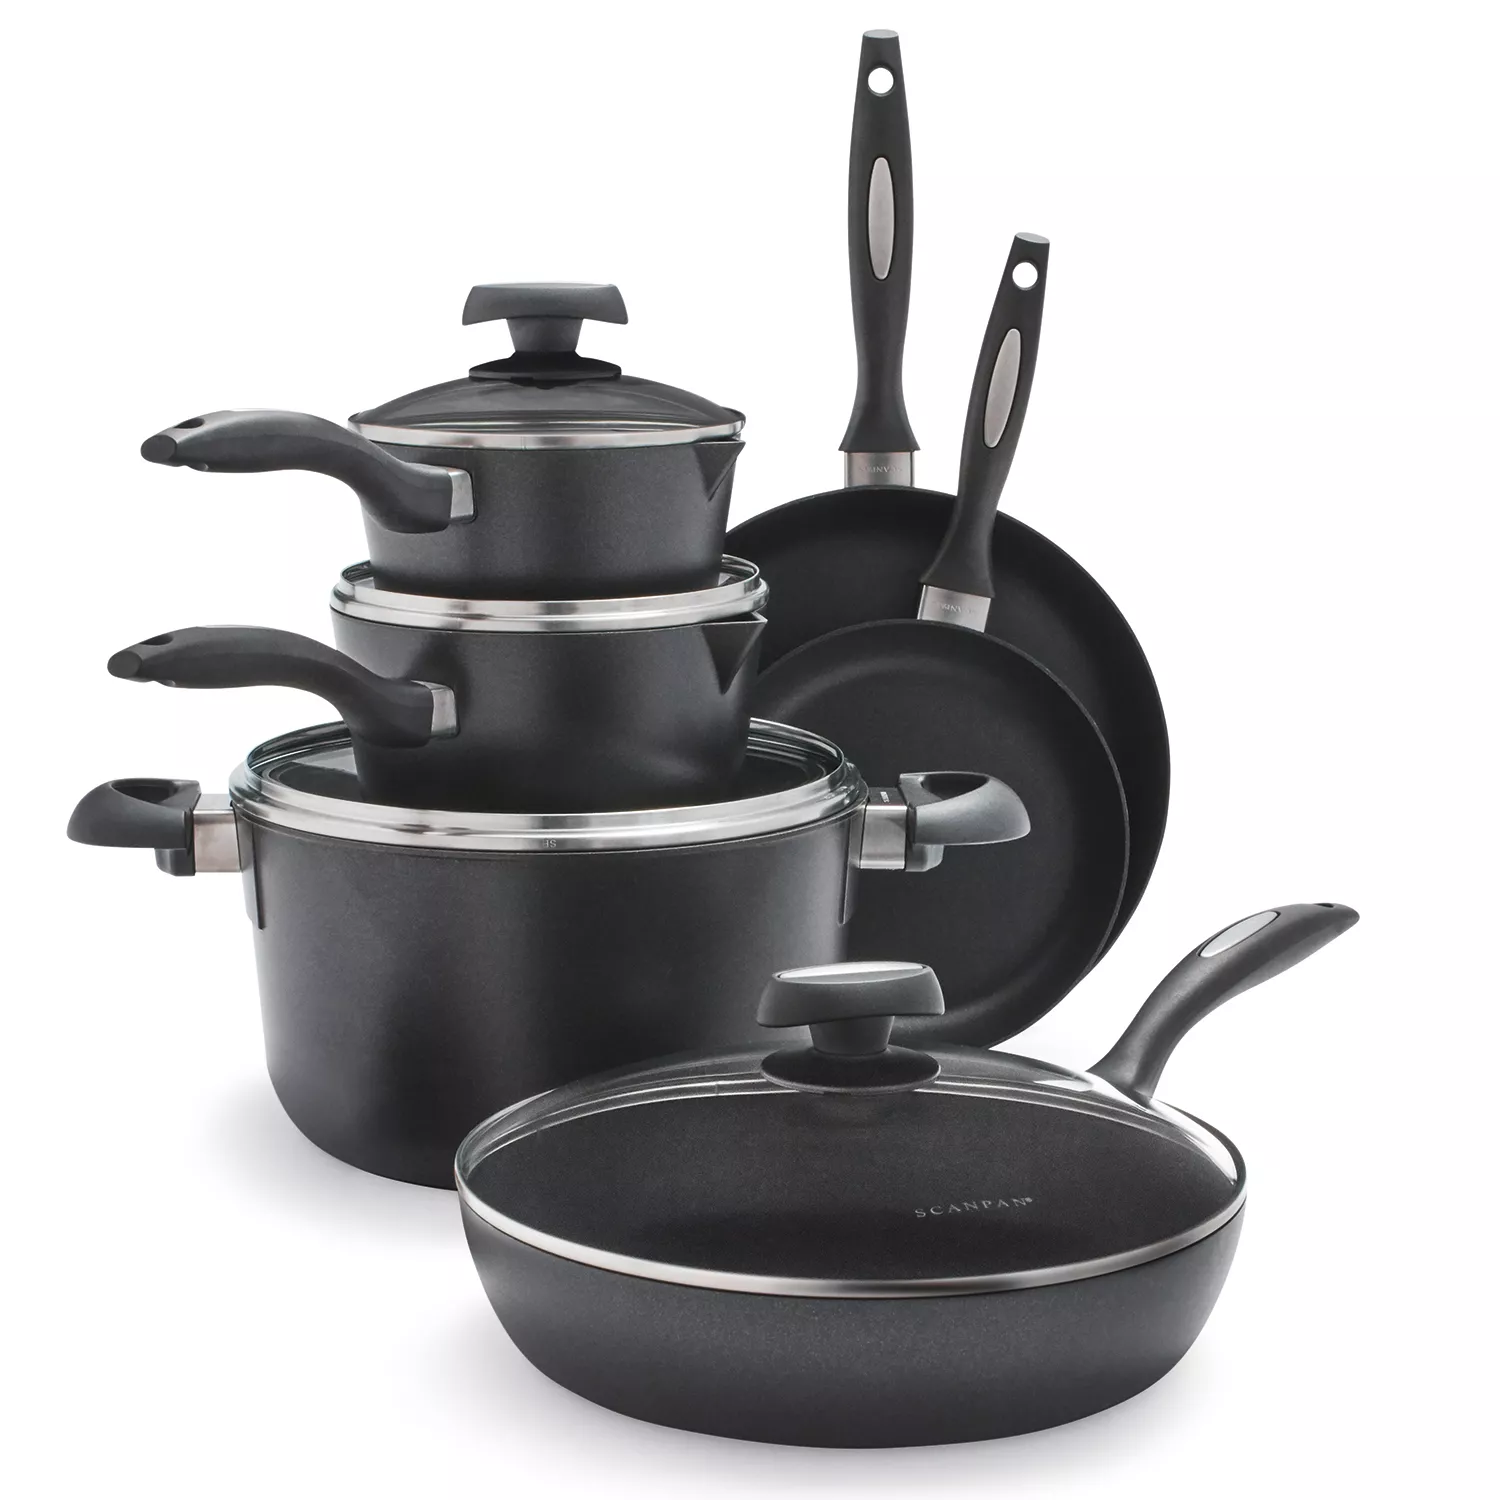 Tefal 9 pcs non-stick cookware set - we will shoulder the shipping fee